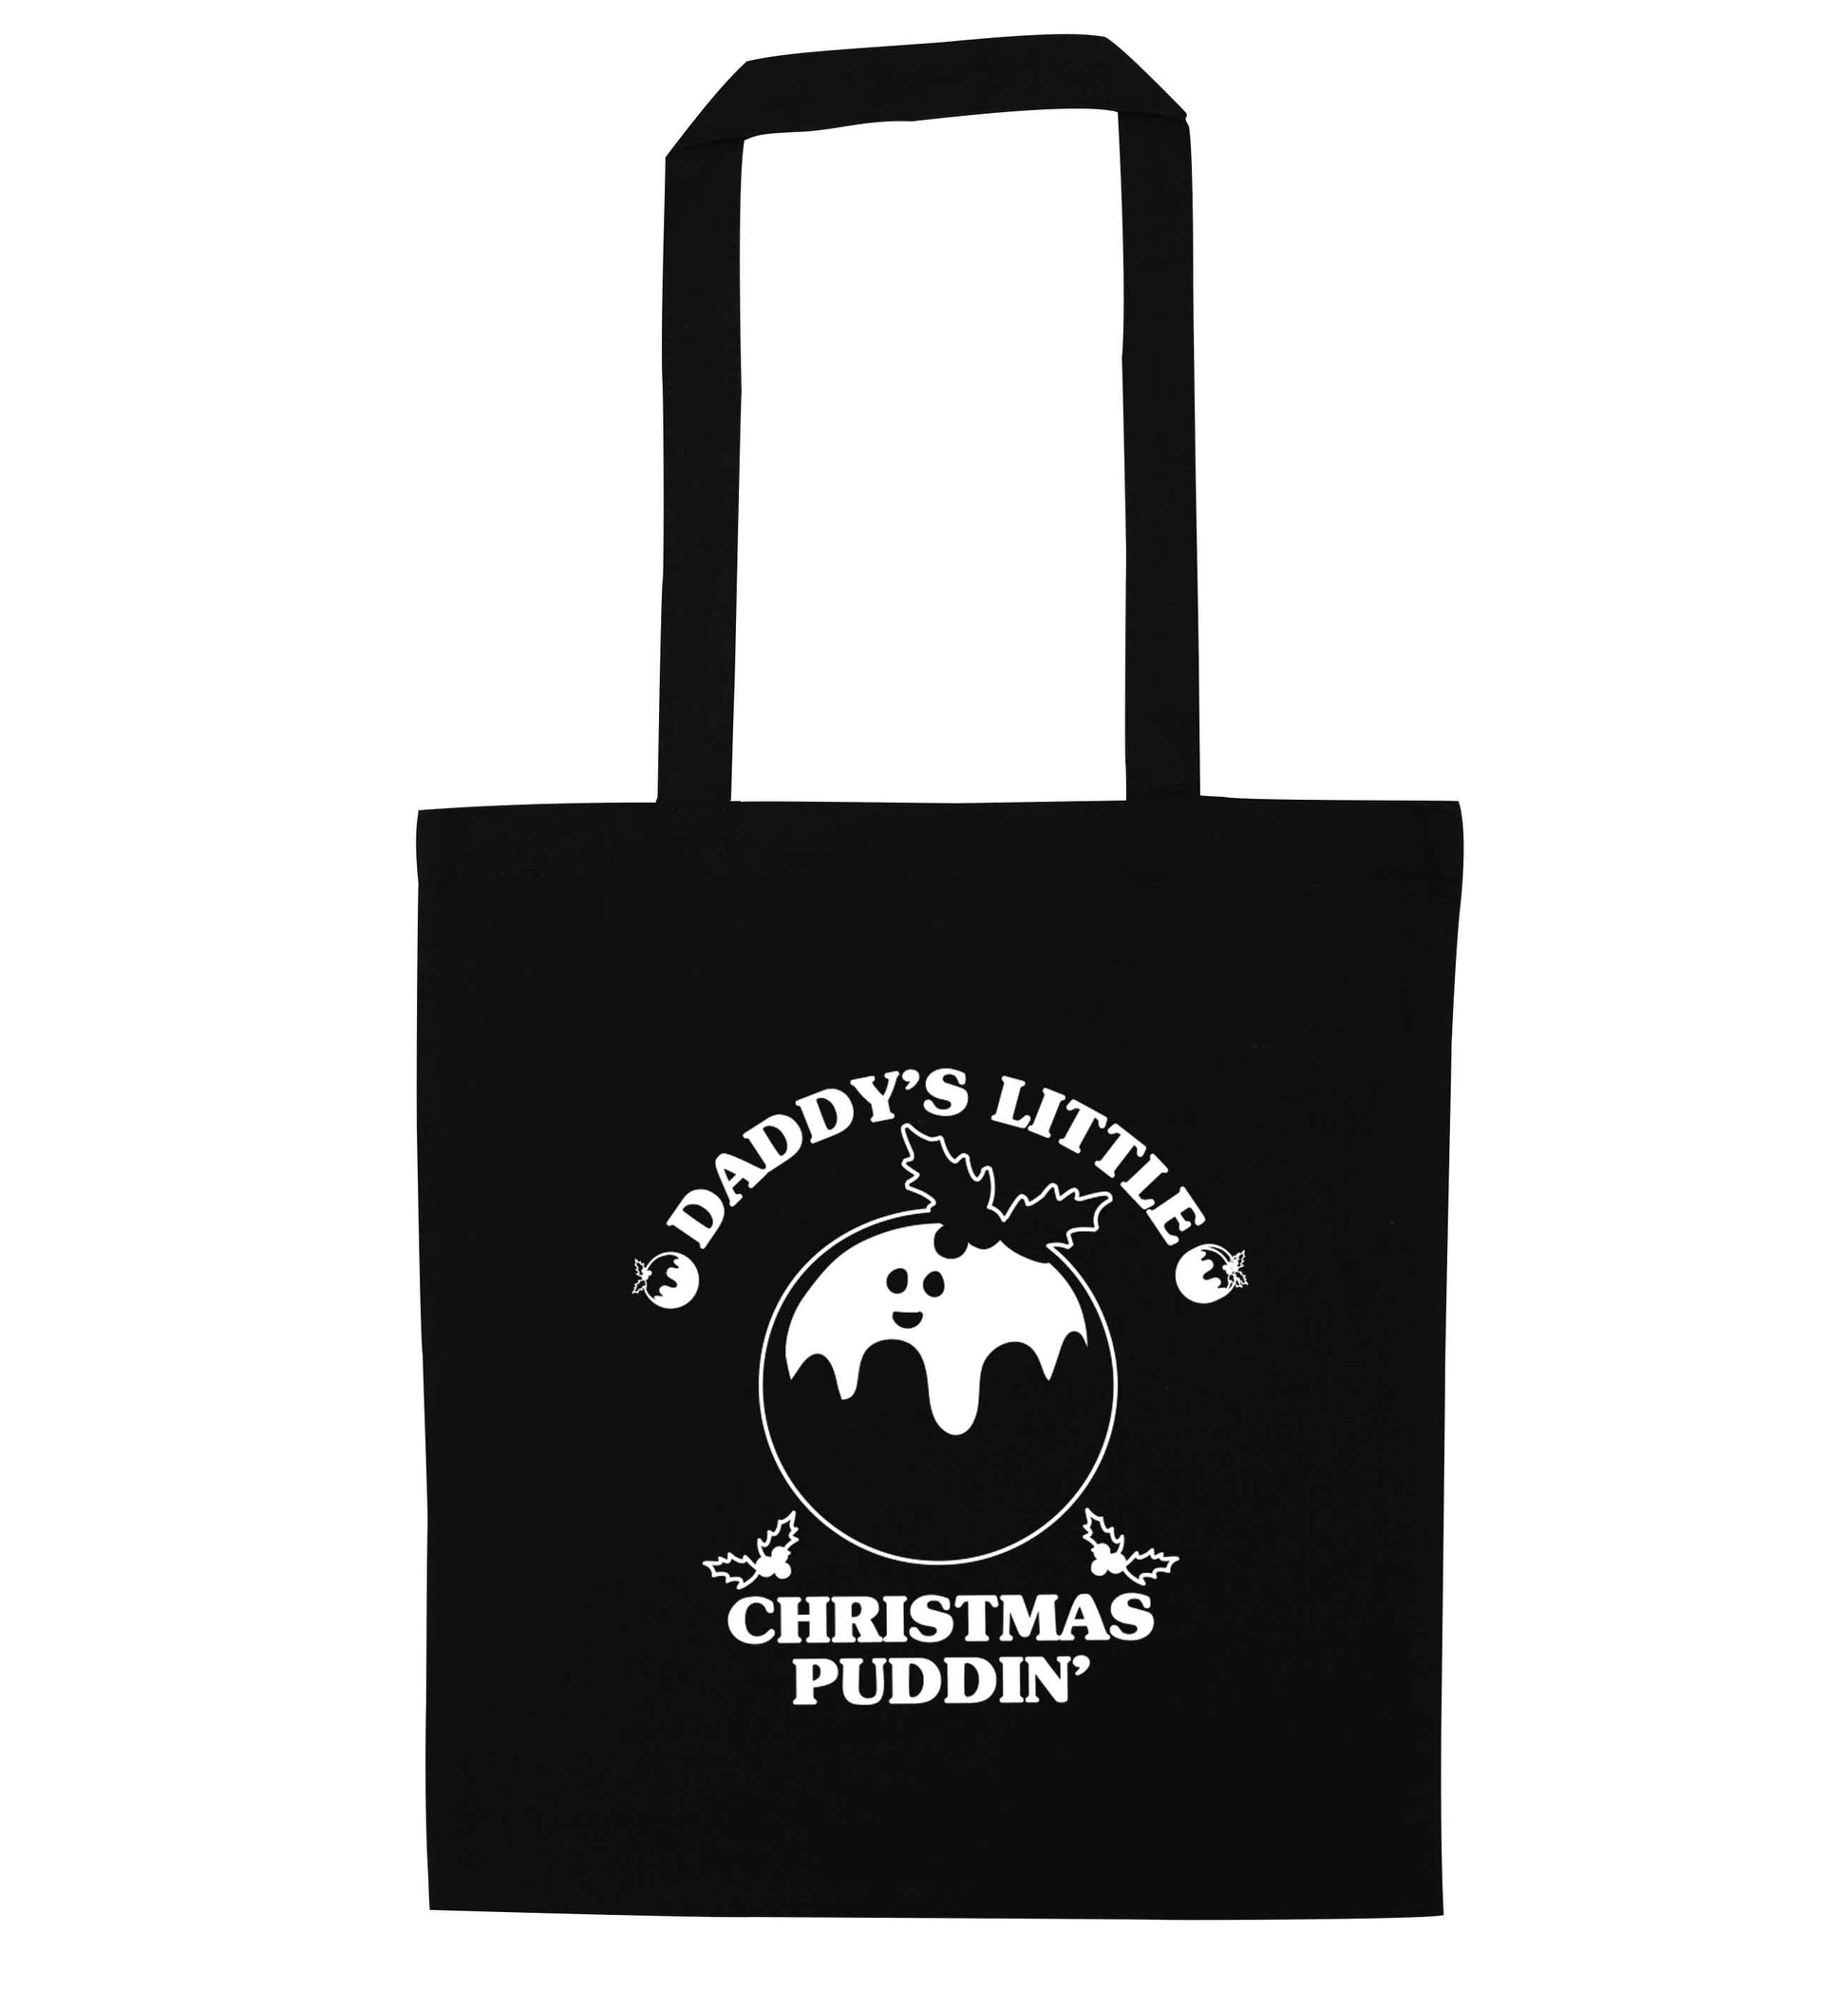 Daddy's little Christmas puddin' black tote bag